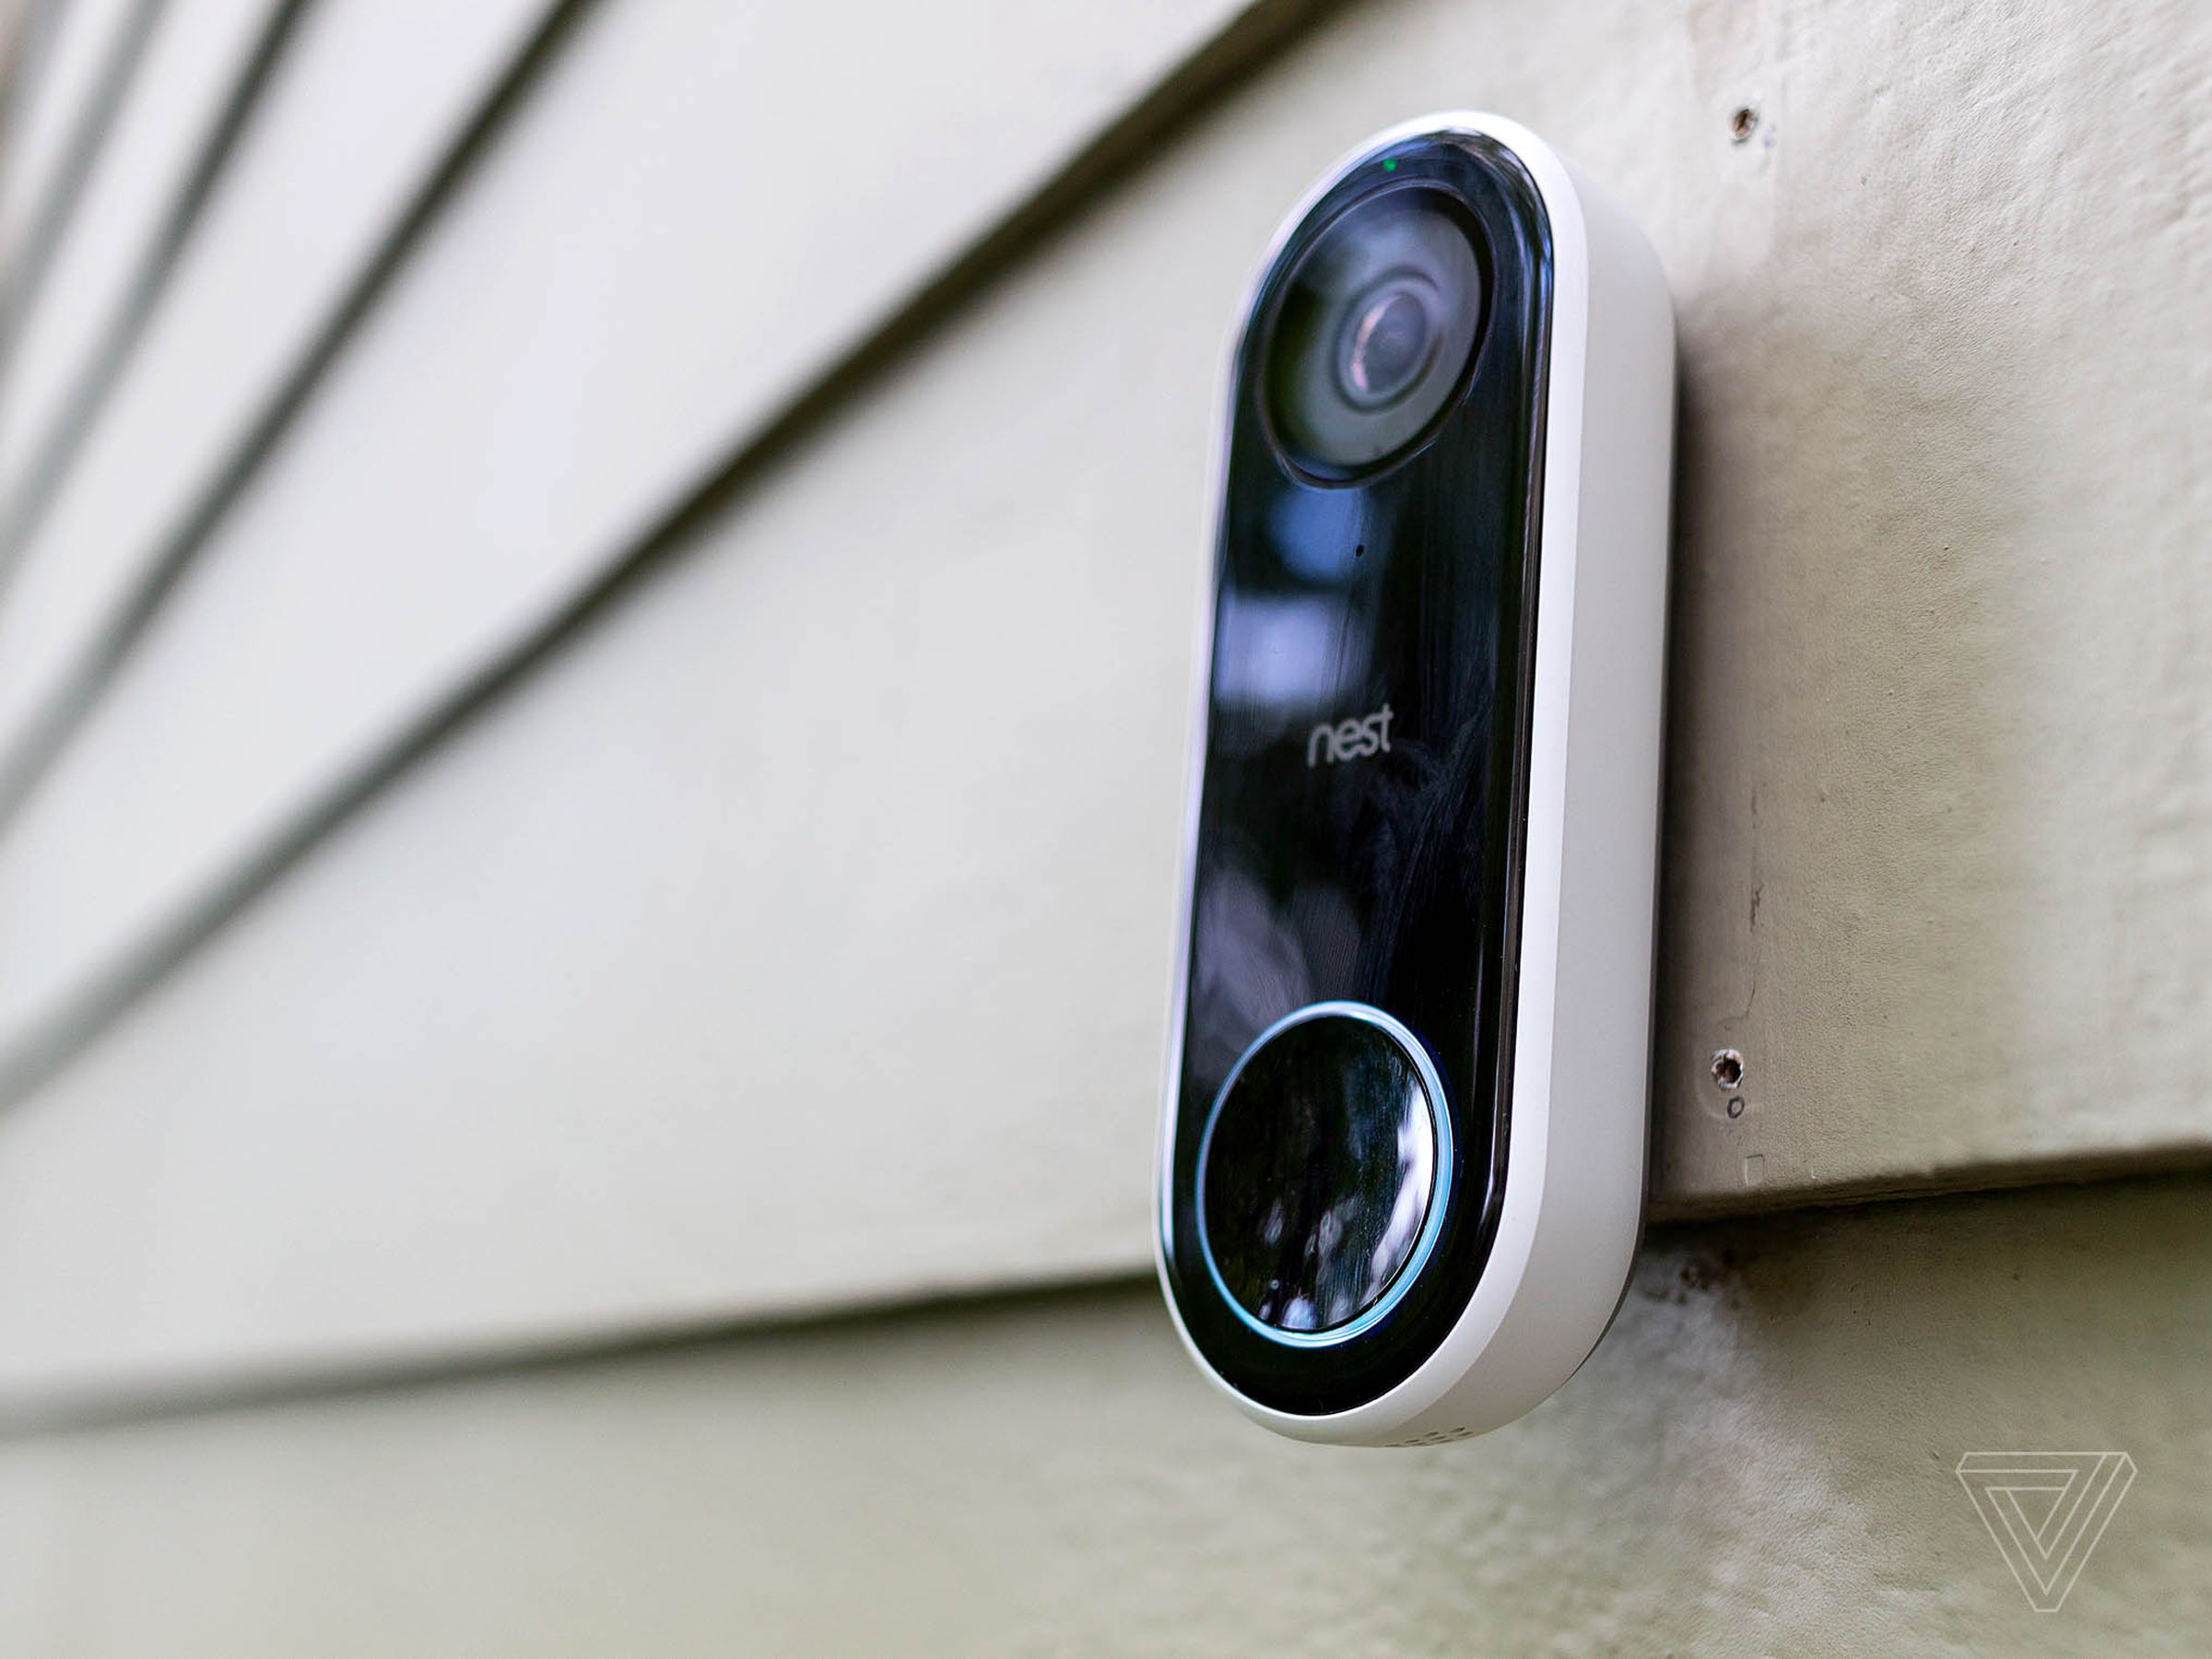 The Nest Hello is smaller than other doorbells, so don’t be surprised if there are a couple of holes leftover after installation.